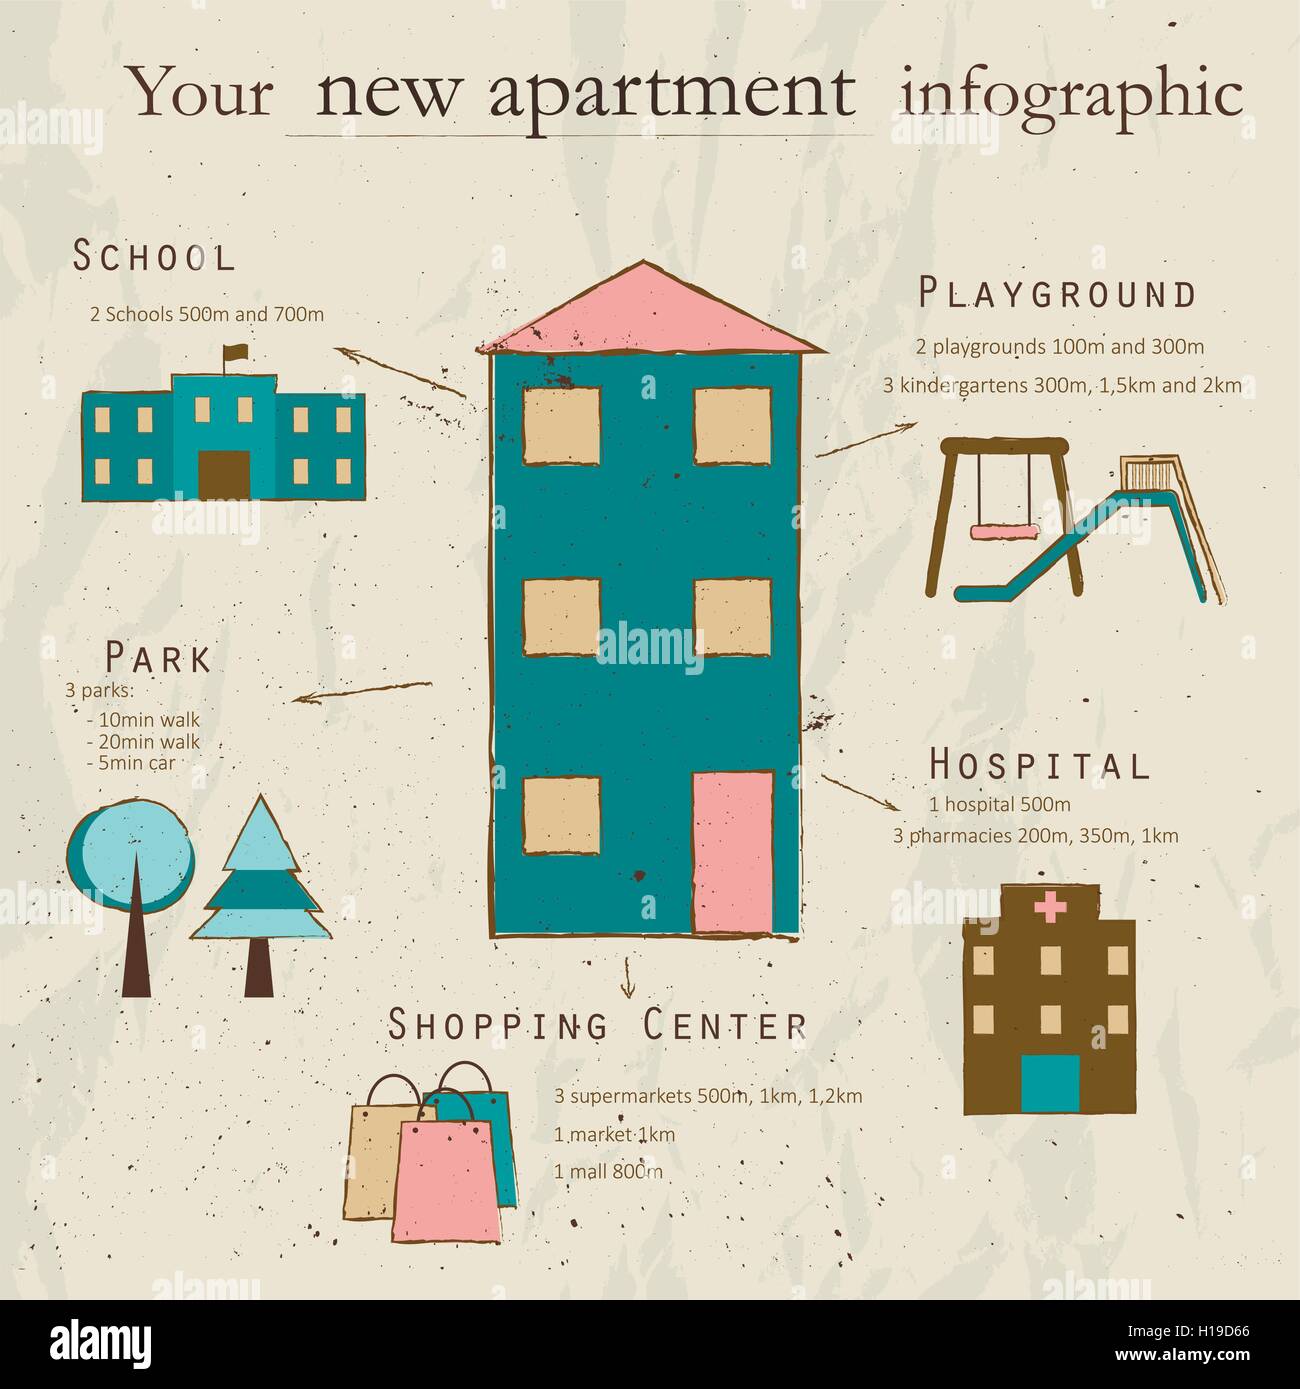 Infographic with information about new apartment. Stock Vector